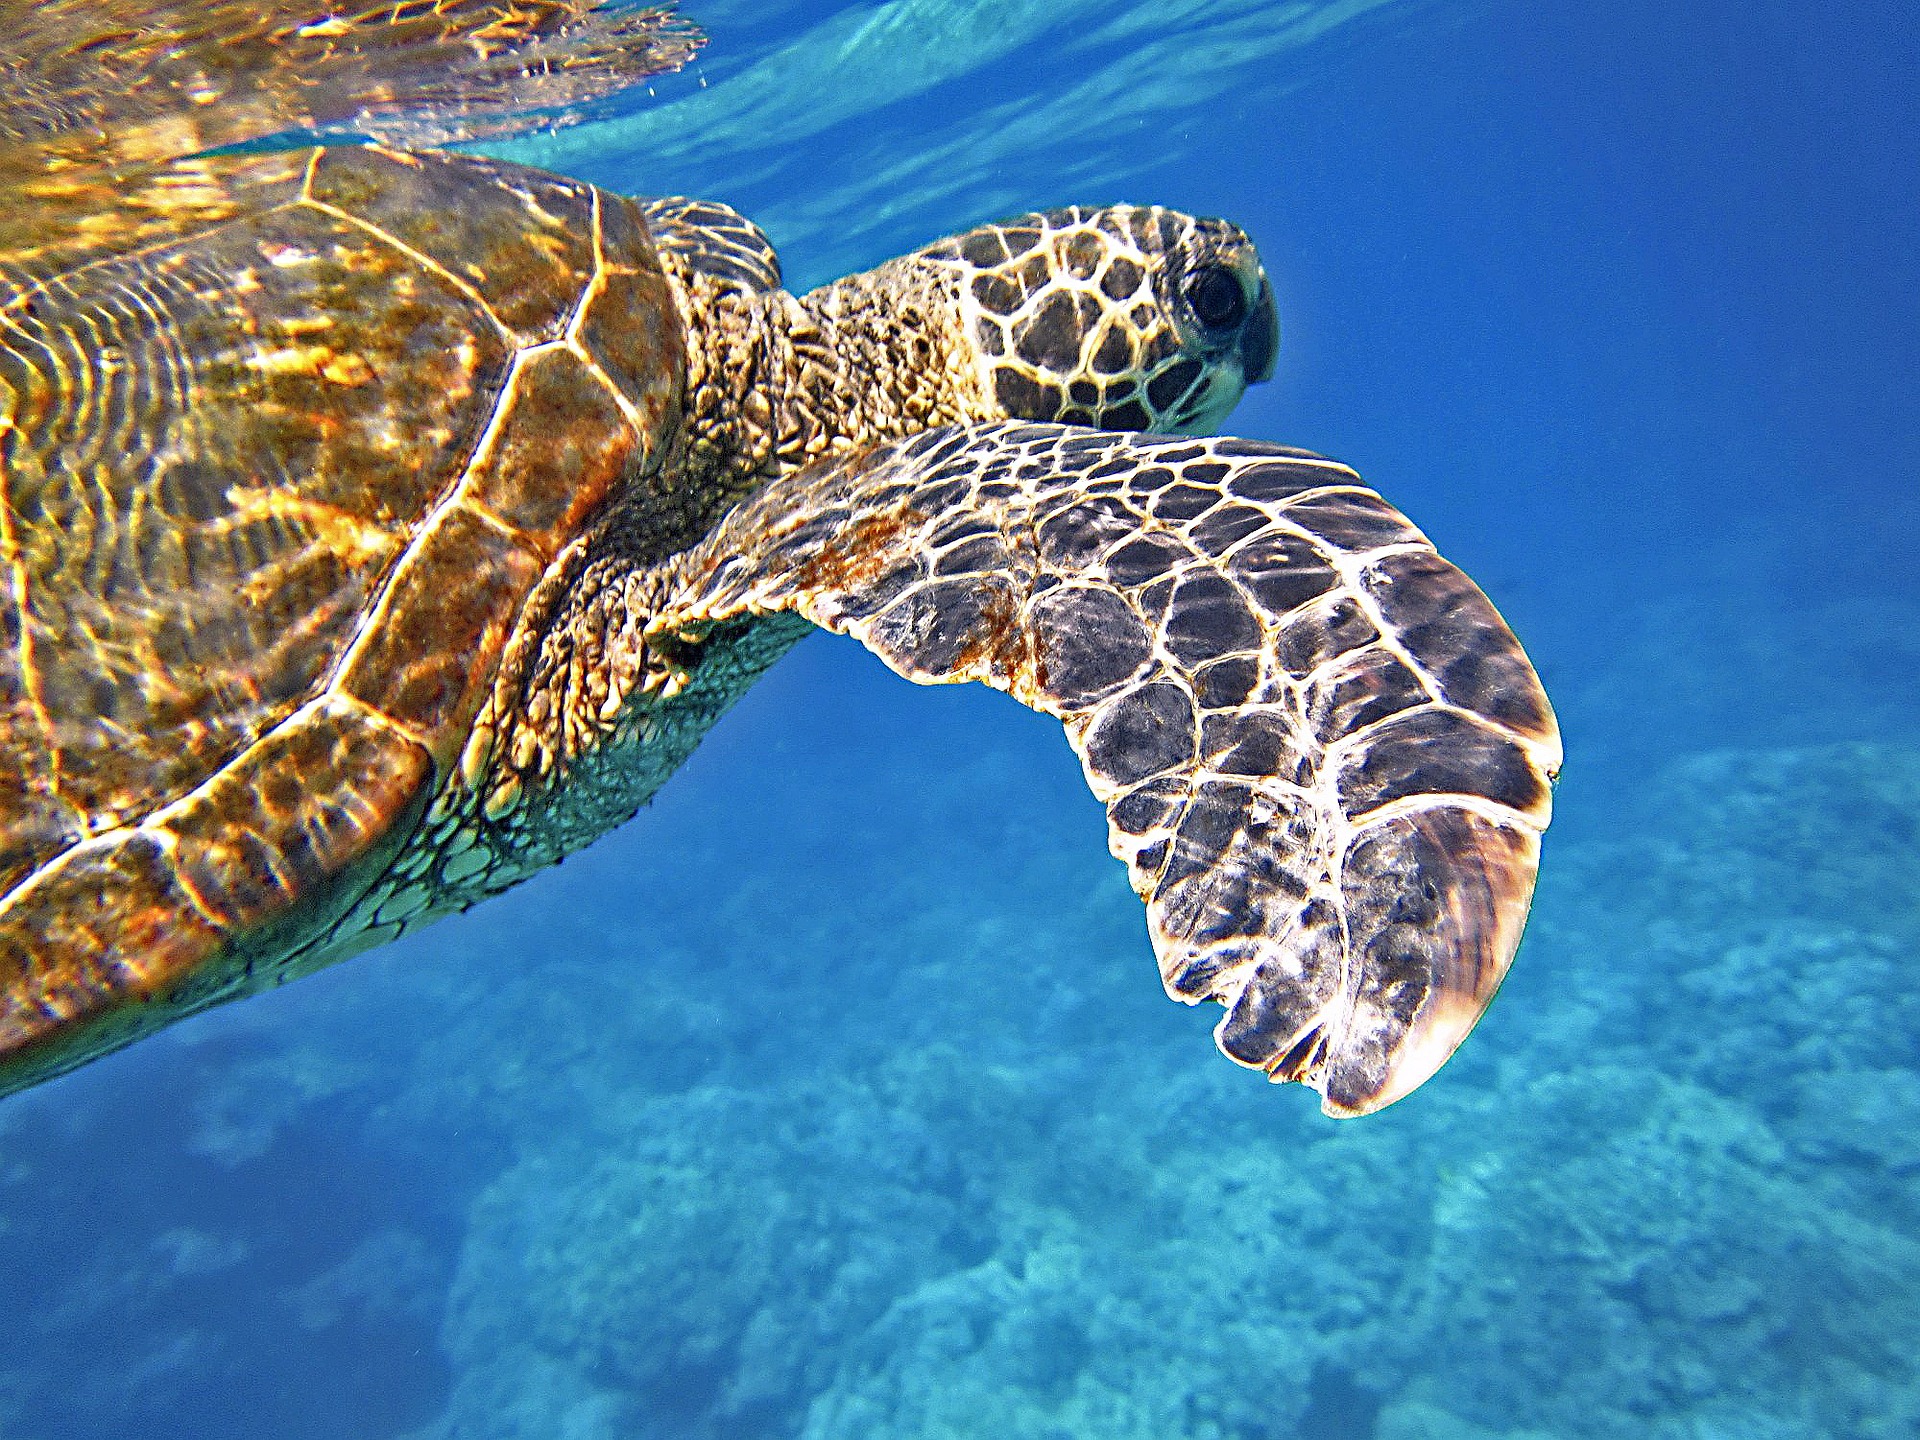 A green sea turtle swimming in blue water